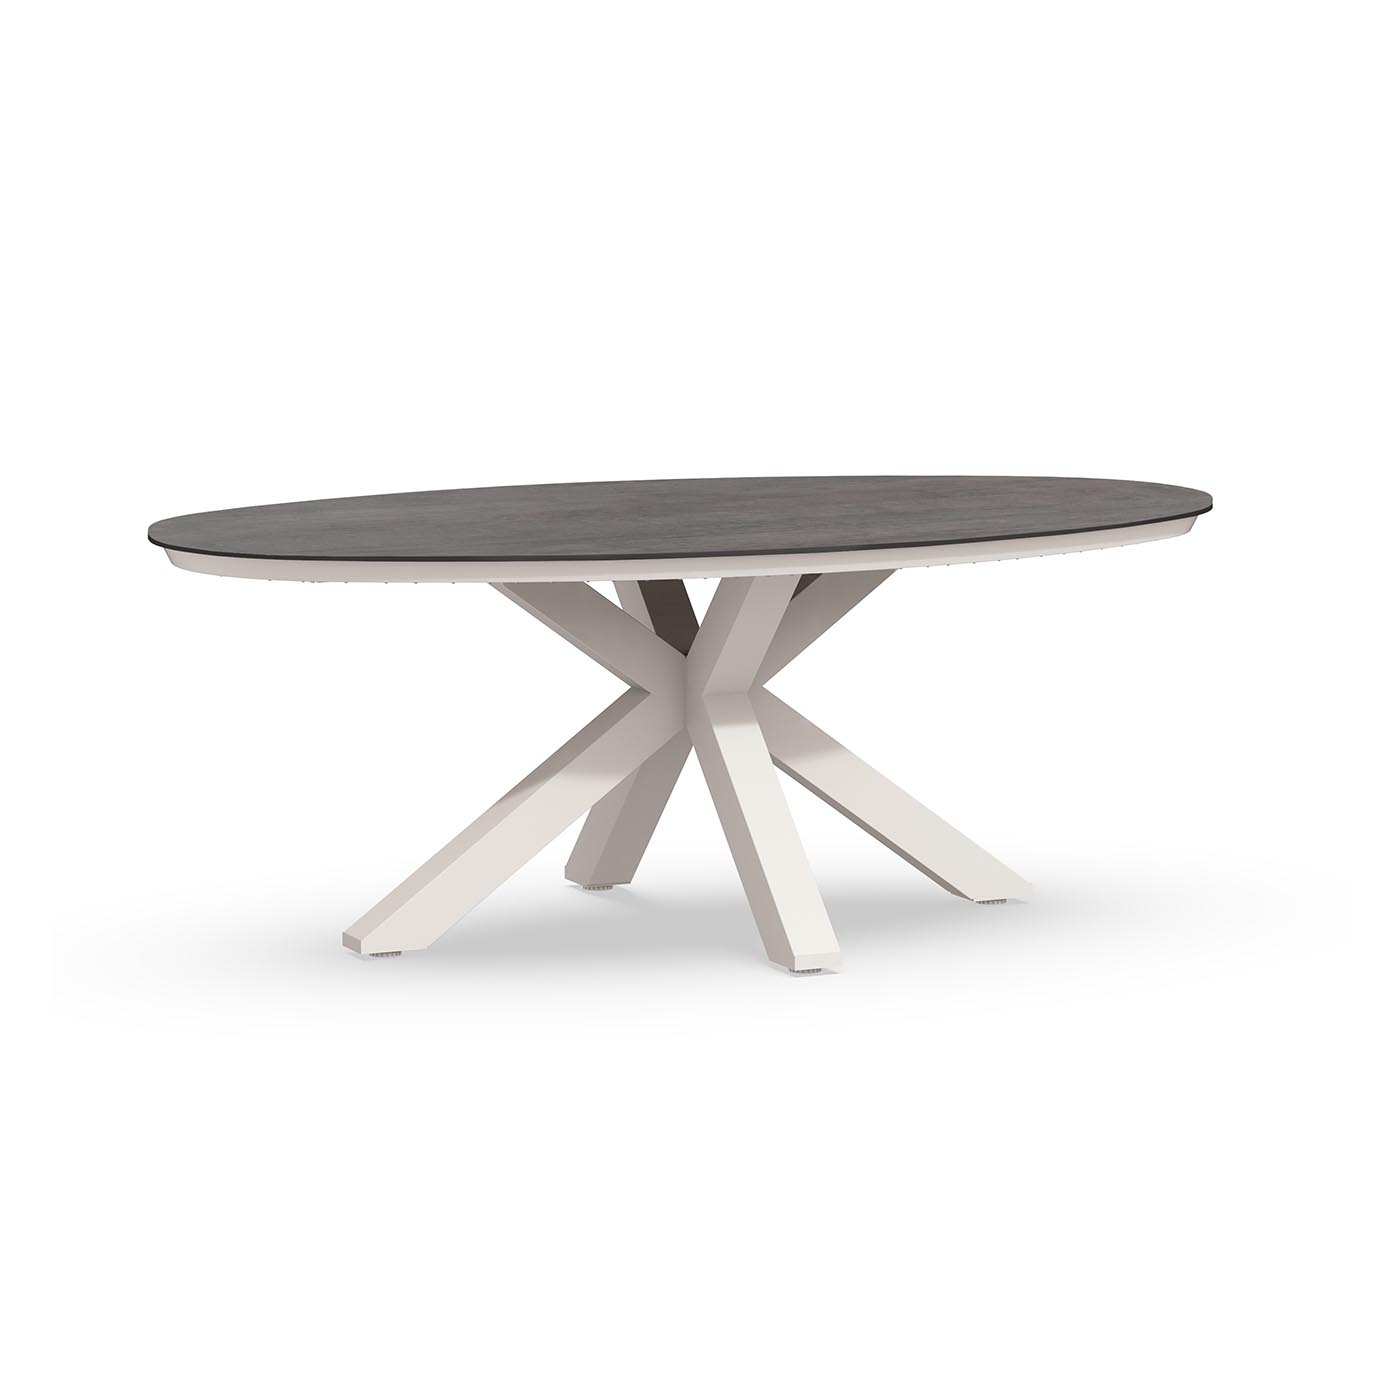 Oblong Dining Table Trespa Forest Grey 200 x 110 cm Creme White